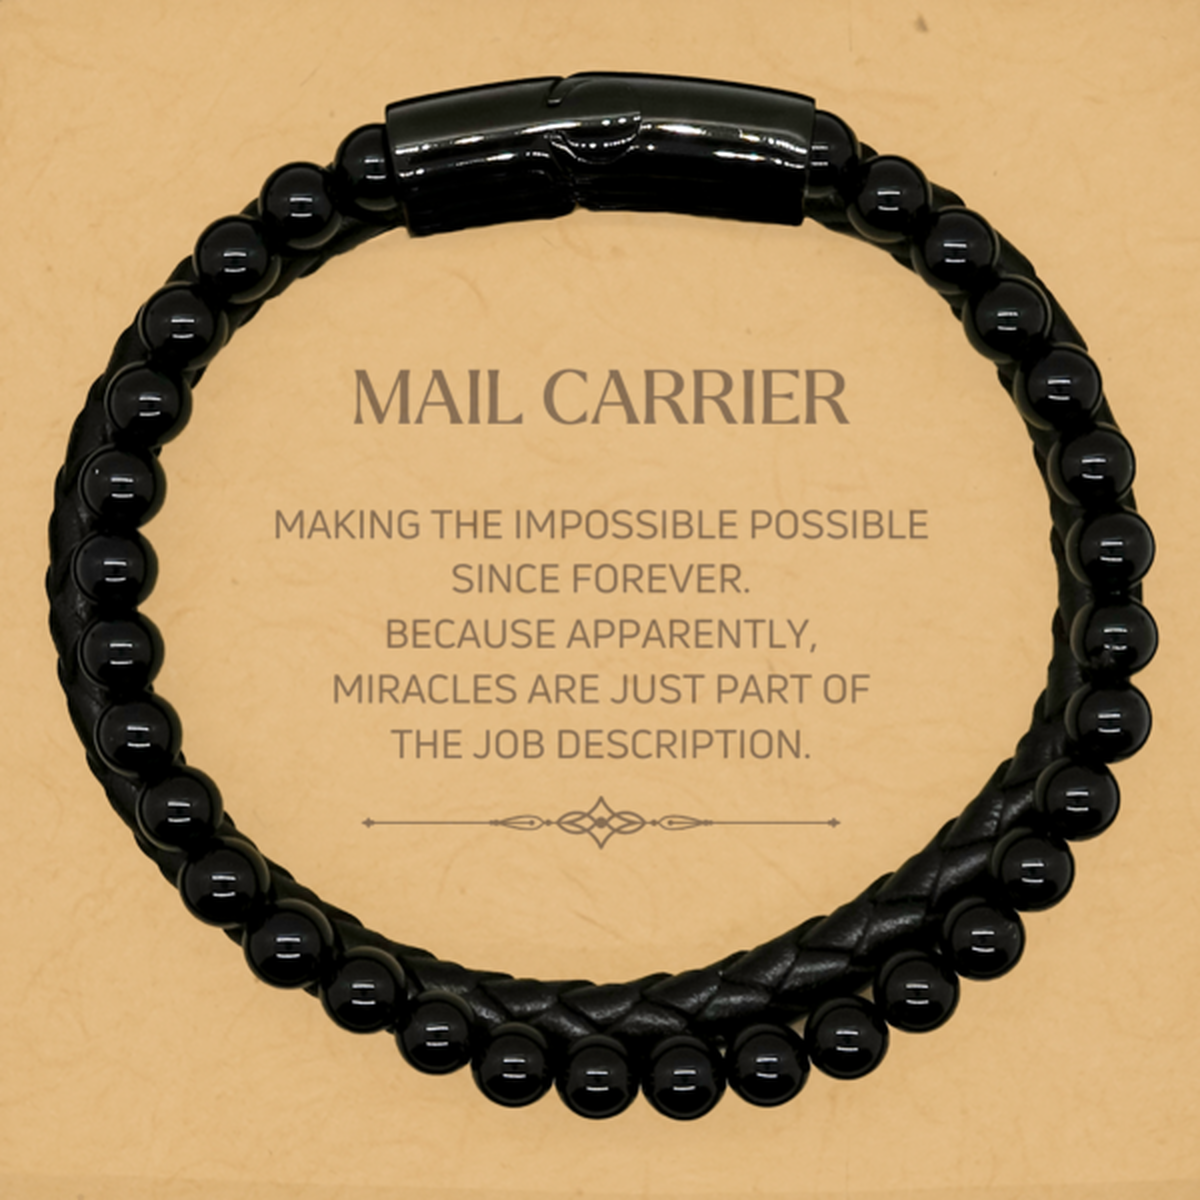 Funny Mail Carrier Gifts, Miracles are just part of the job description, Inspirational Birthday Stone Leather Bracelets For Mail Carrier, Men, Women, Coworkers, Friends, Boss